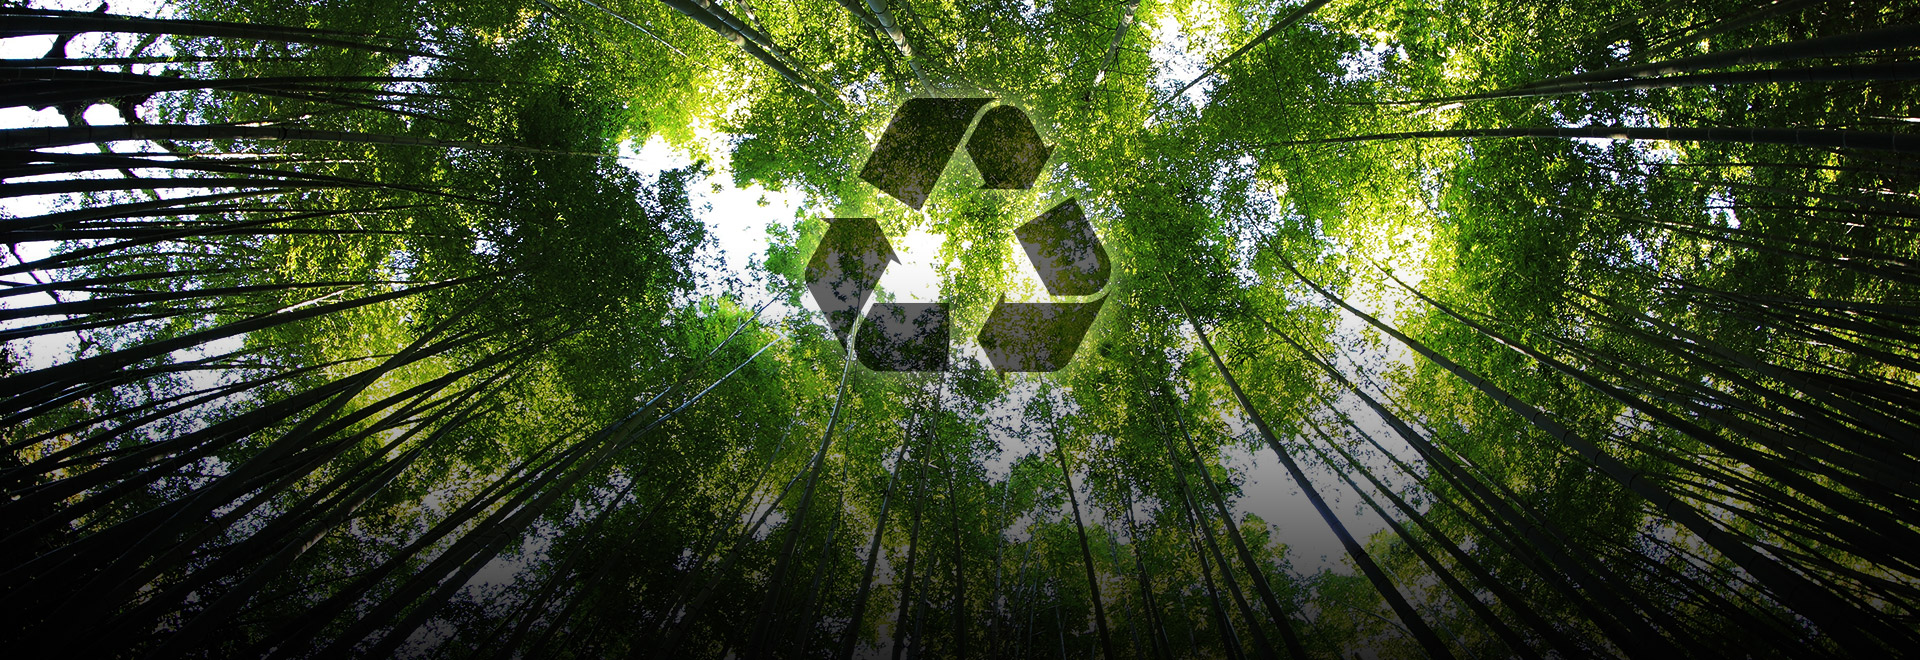 Environmental Friendly Business - RSTW will be a top environmental friendly company through our wafer reclaim business.